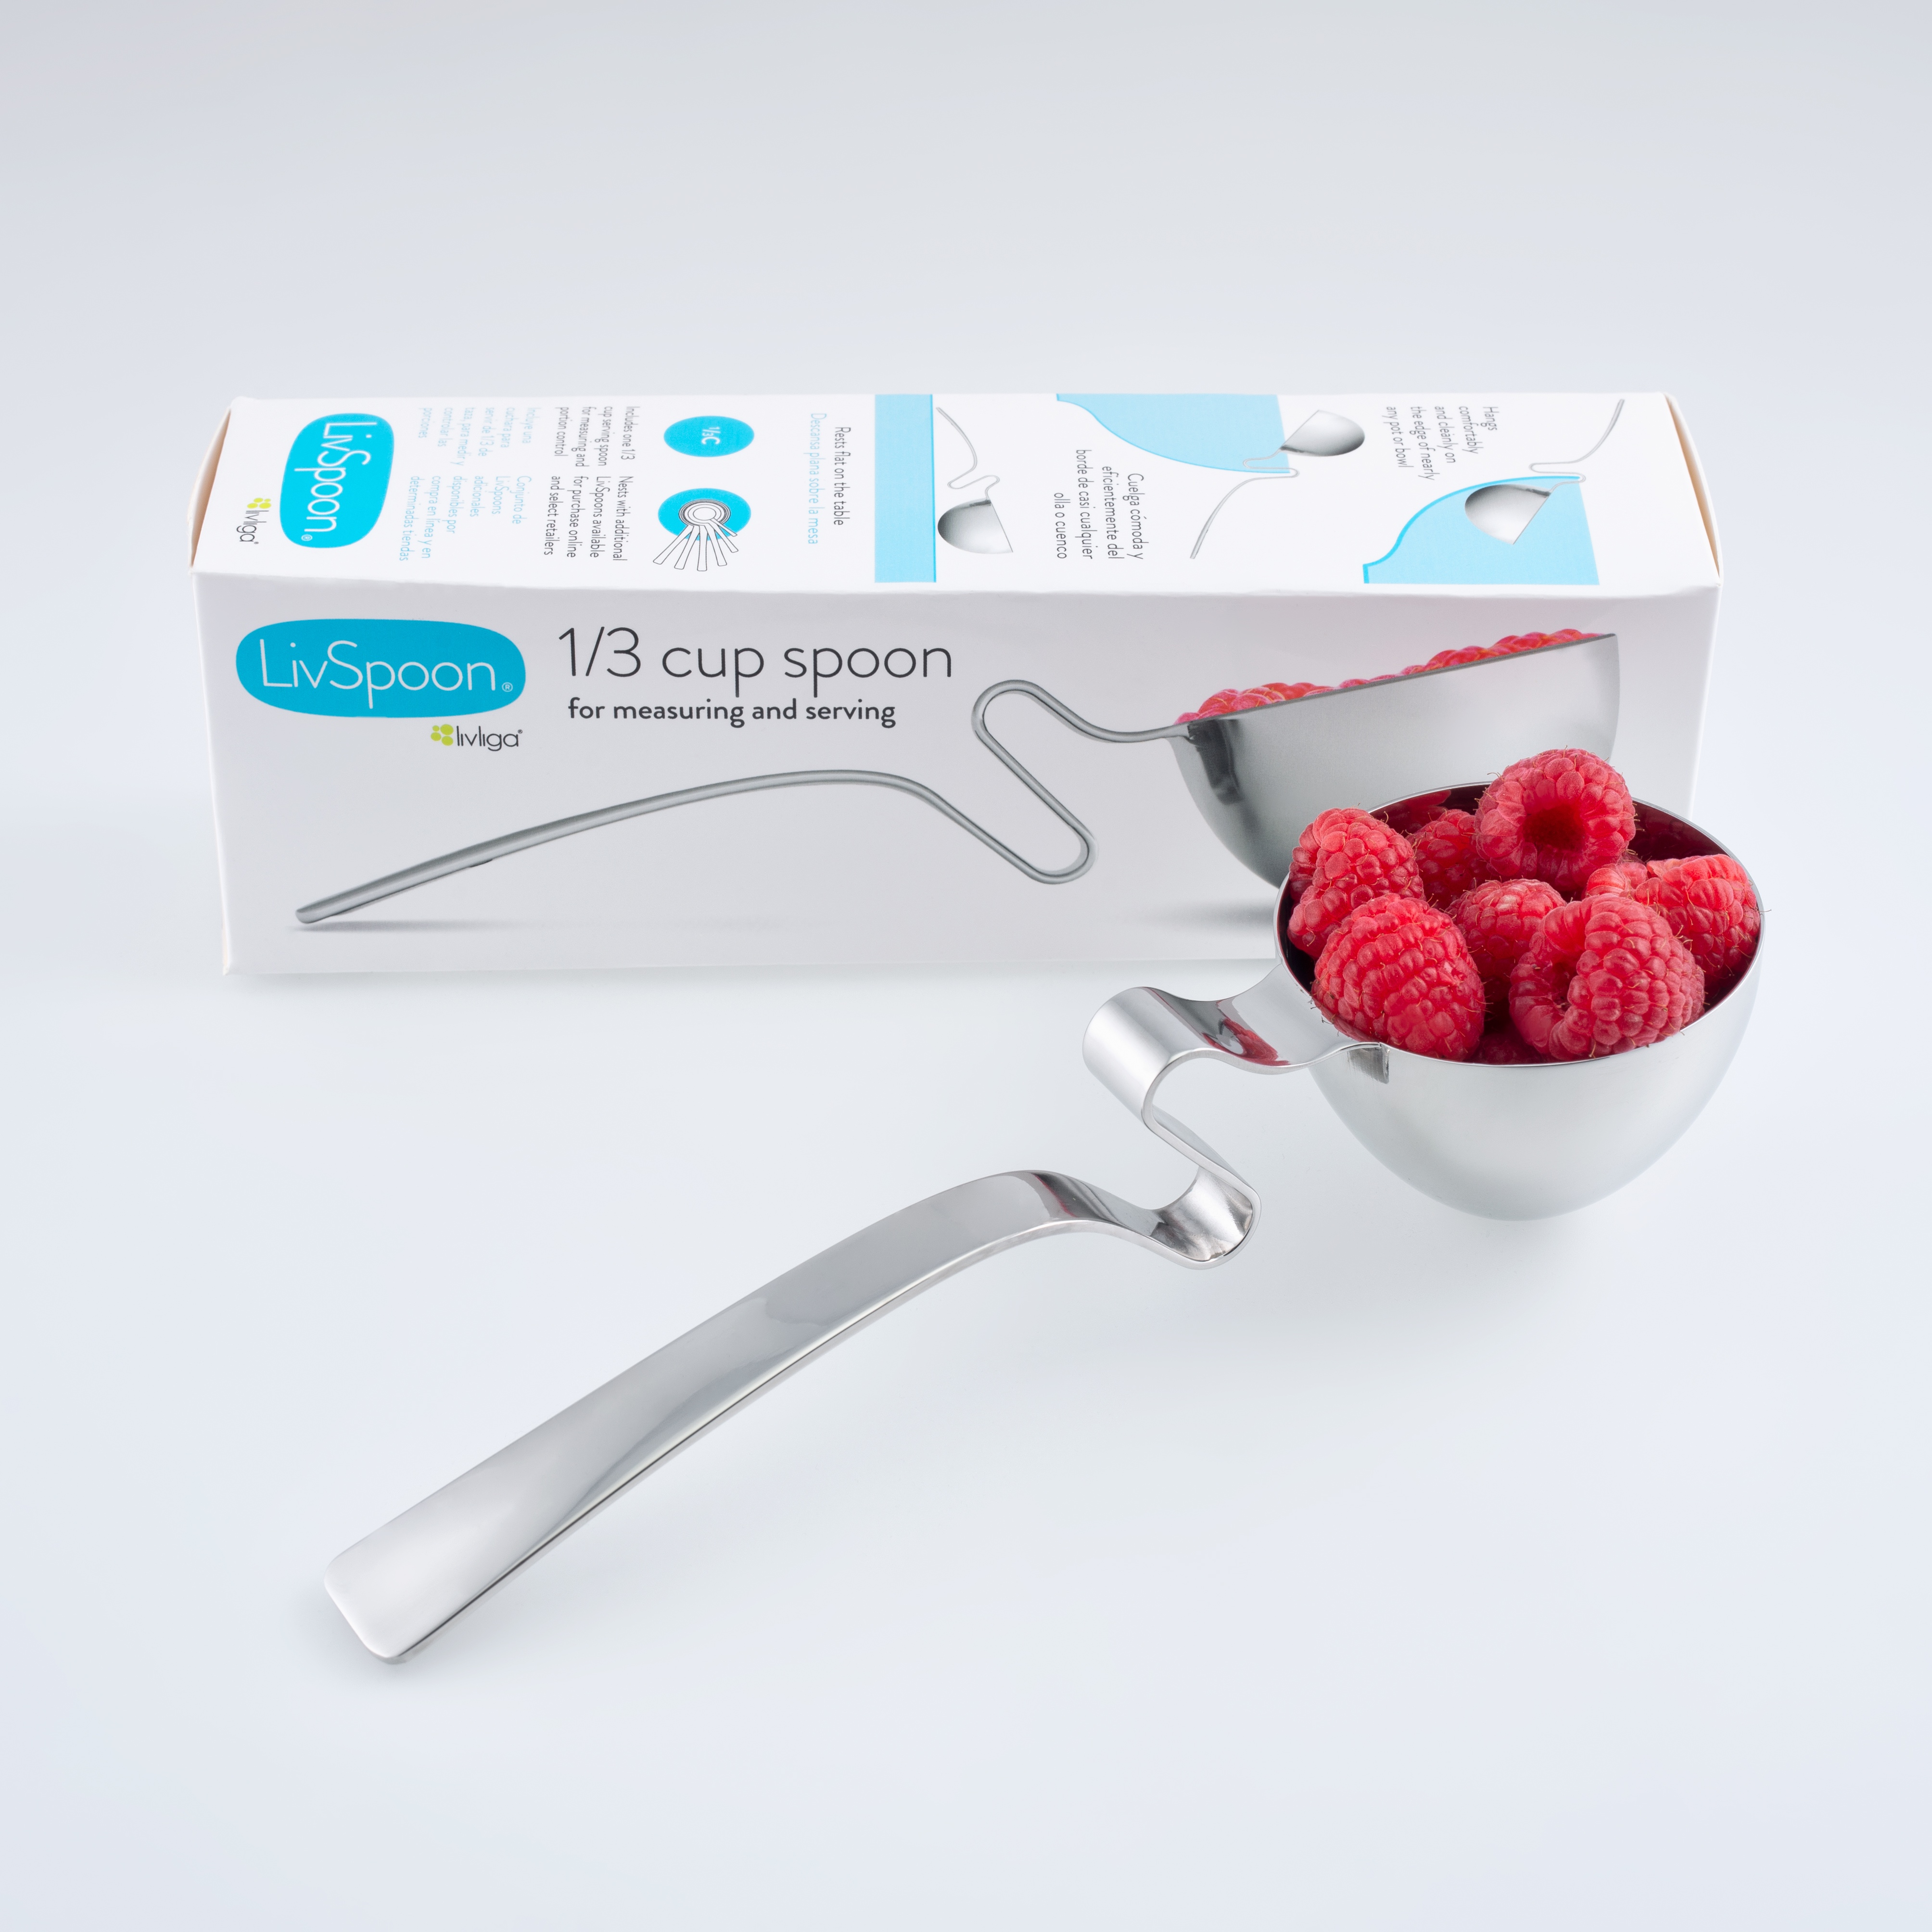 The new 1/3 cup LivSpoon® is great for prepping, cooking and portioning right-sized meals